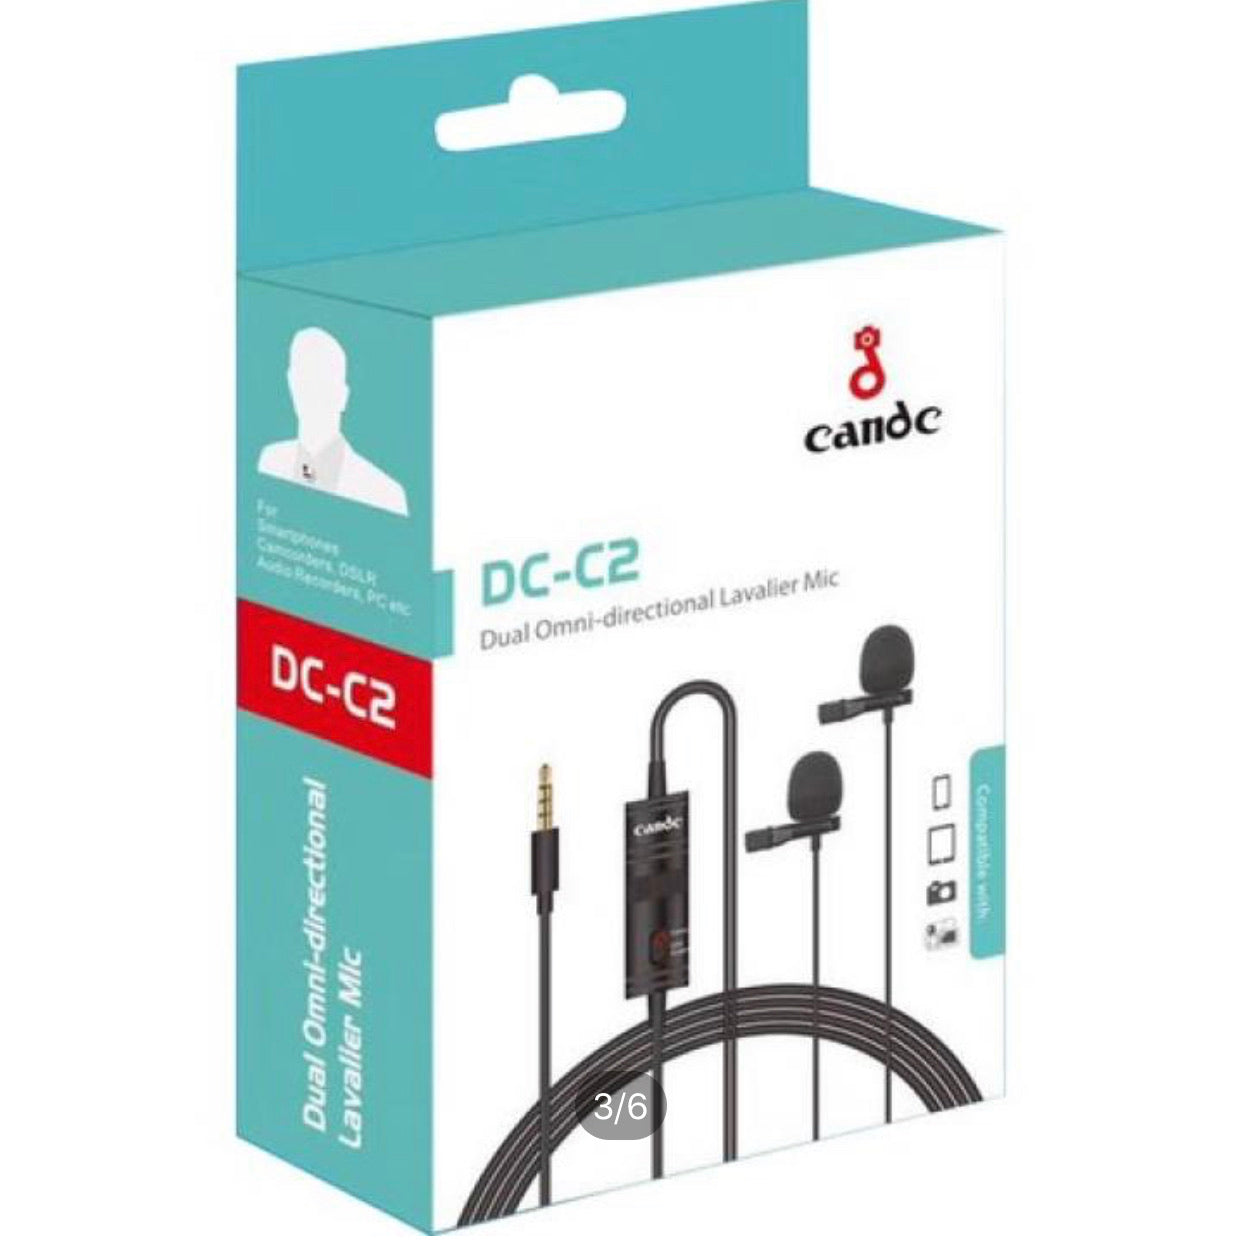 Candc DC-C2 Lavalier Collar Microphone